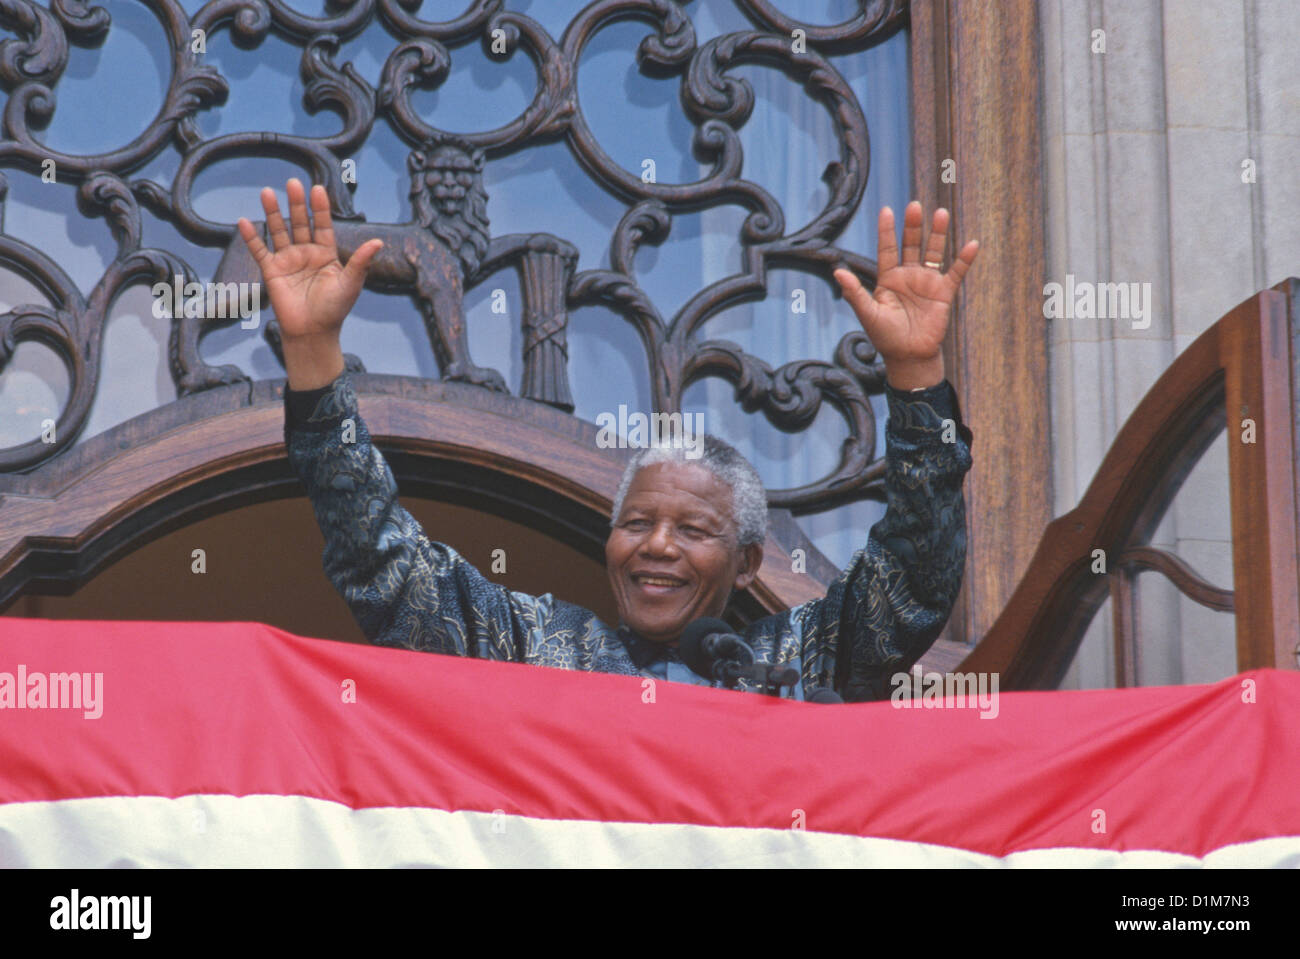 Ex-president of South Africa and world leader Nelson Mandela, during a visit to London, UK Stock Photo